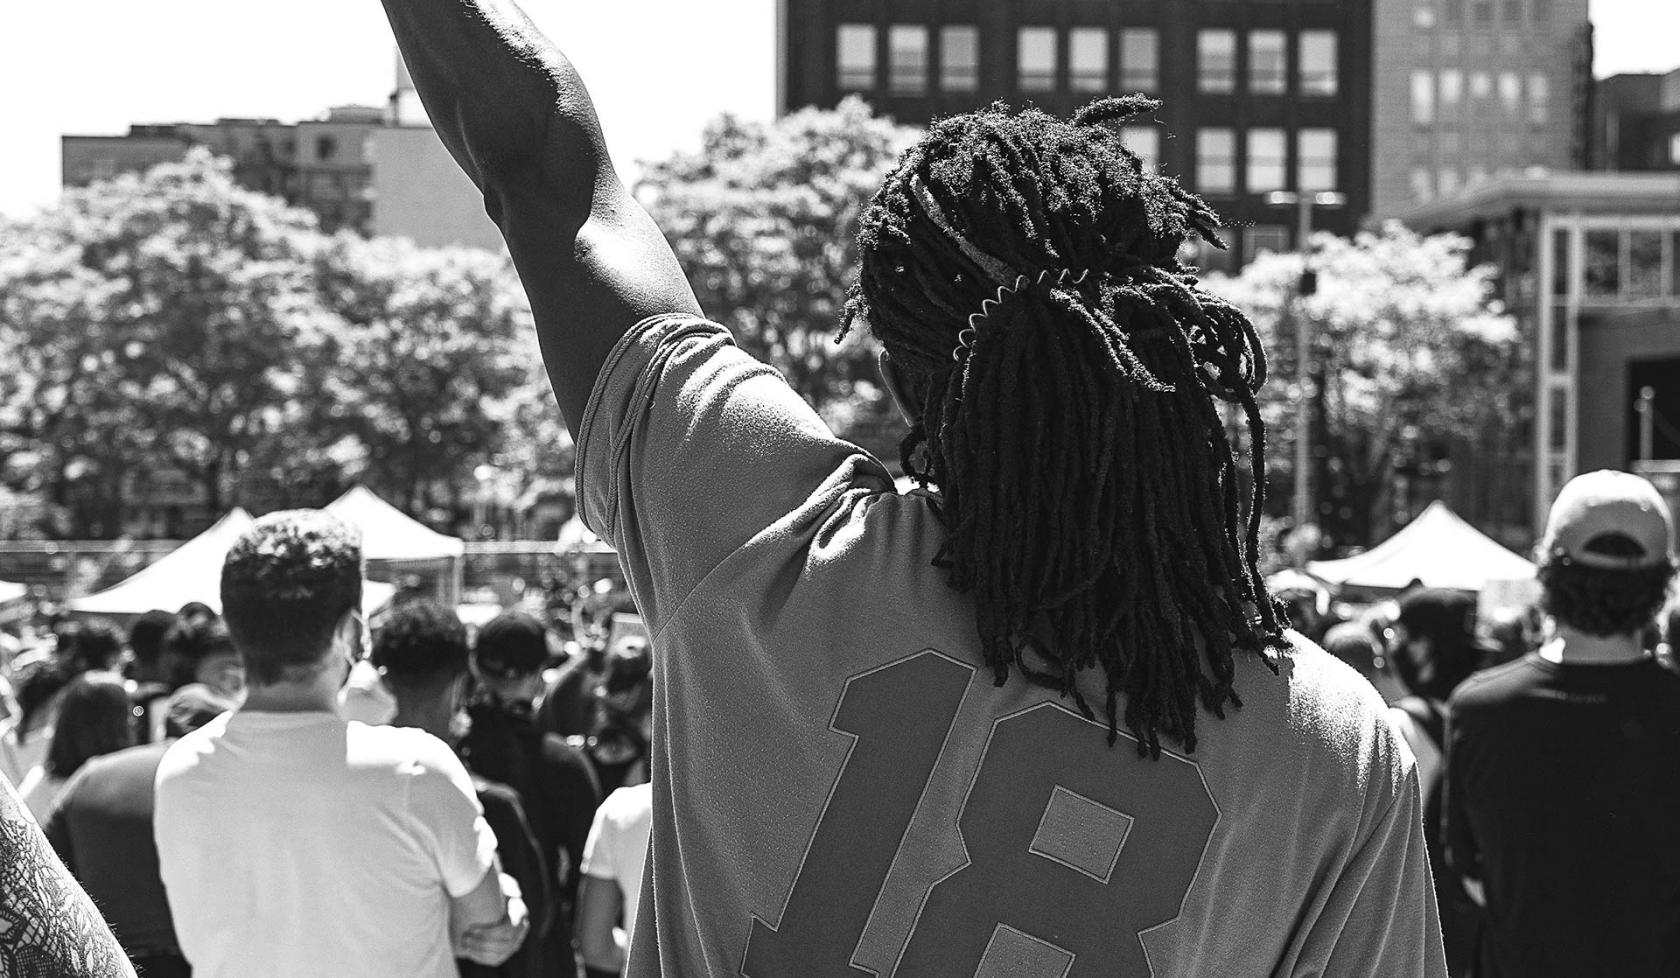 Black Male - fist raised - at protest or rally